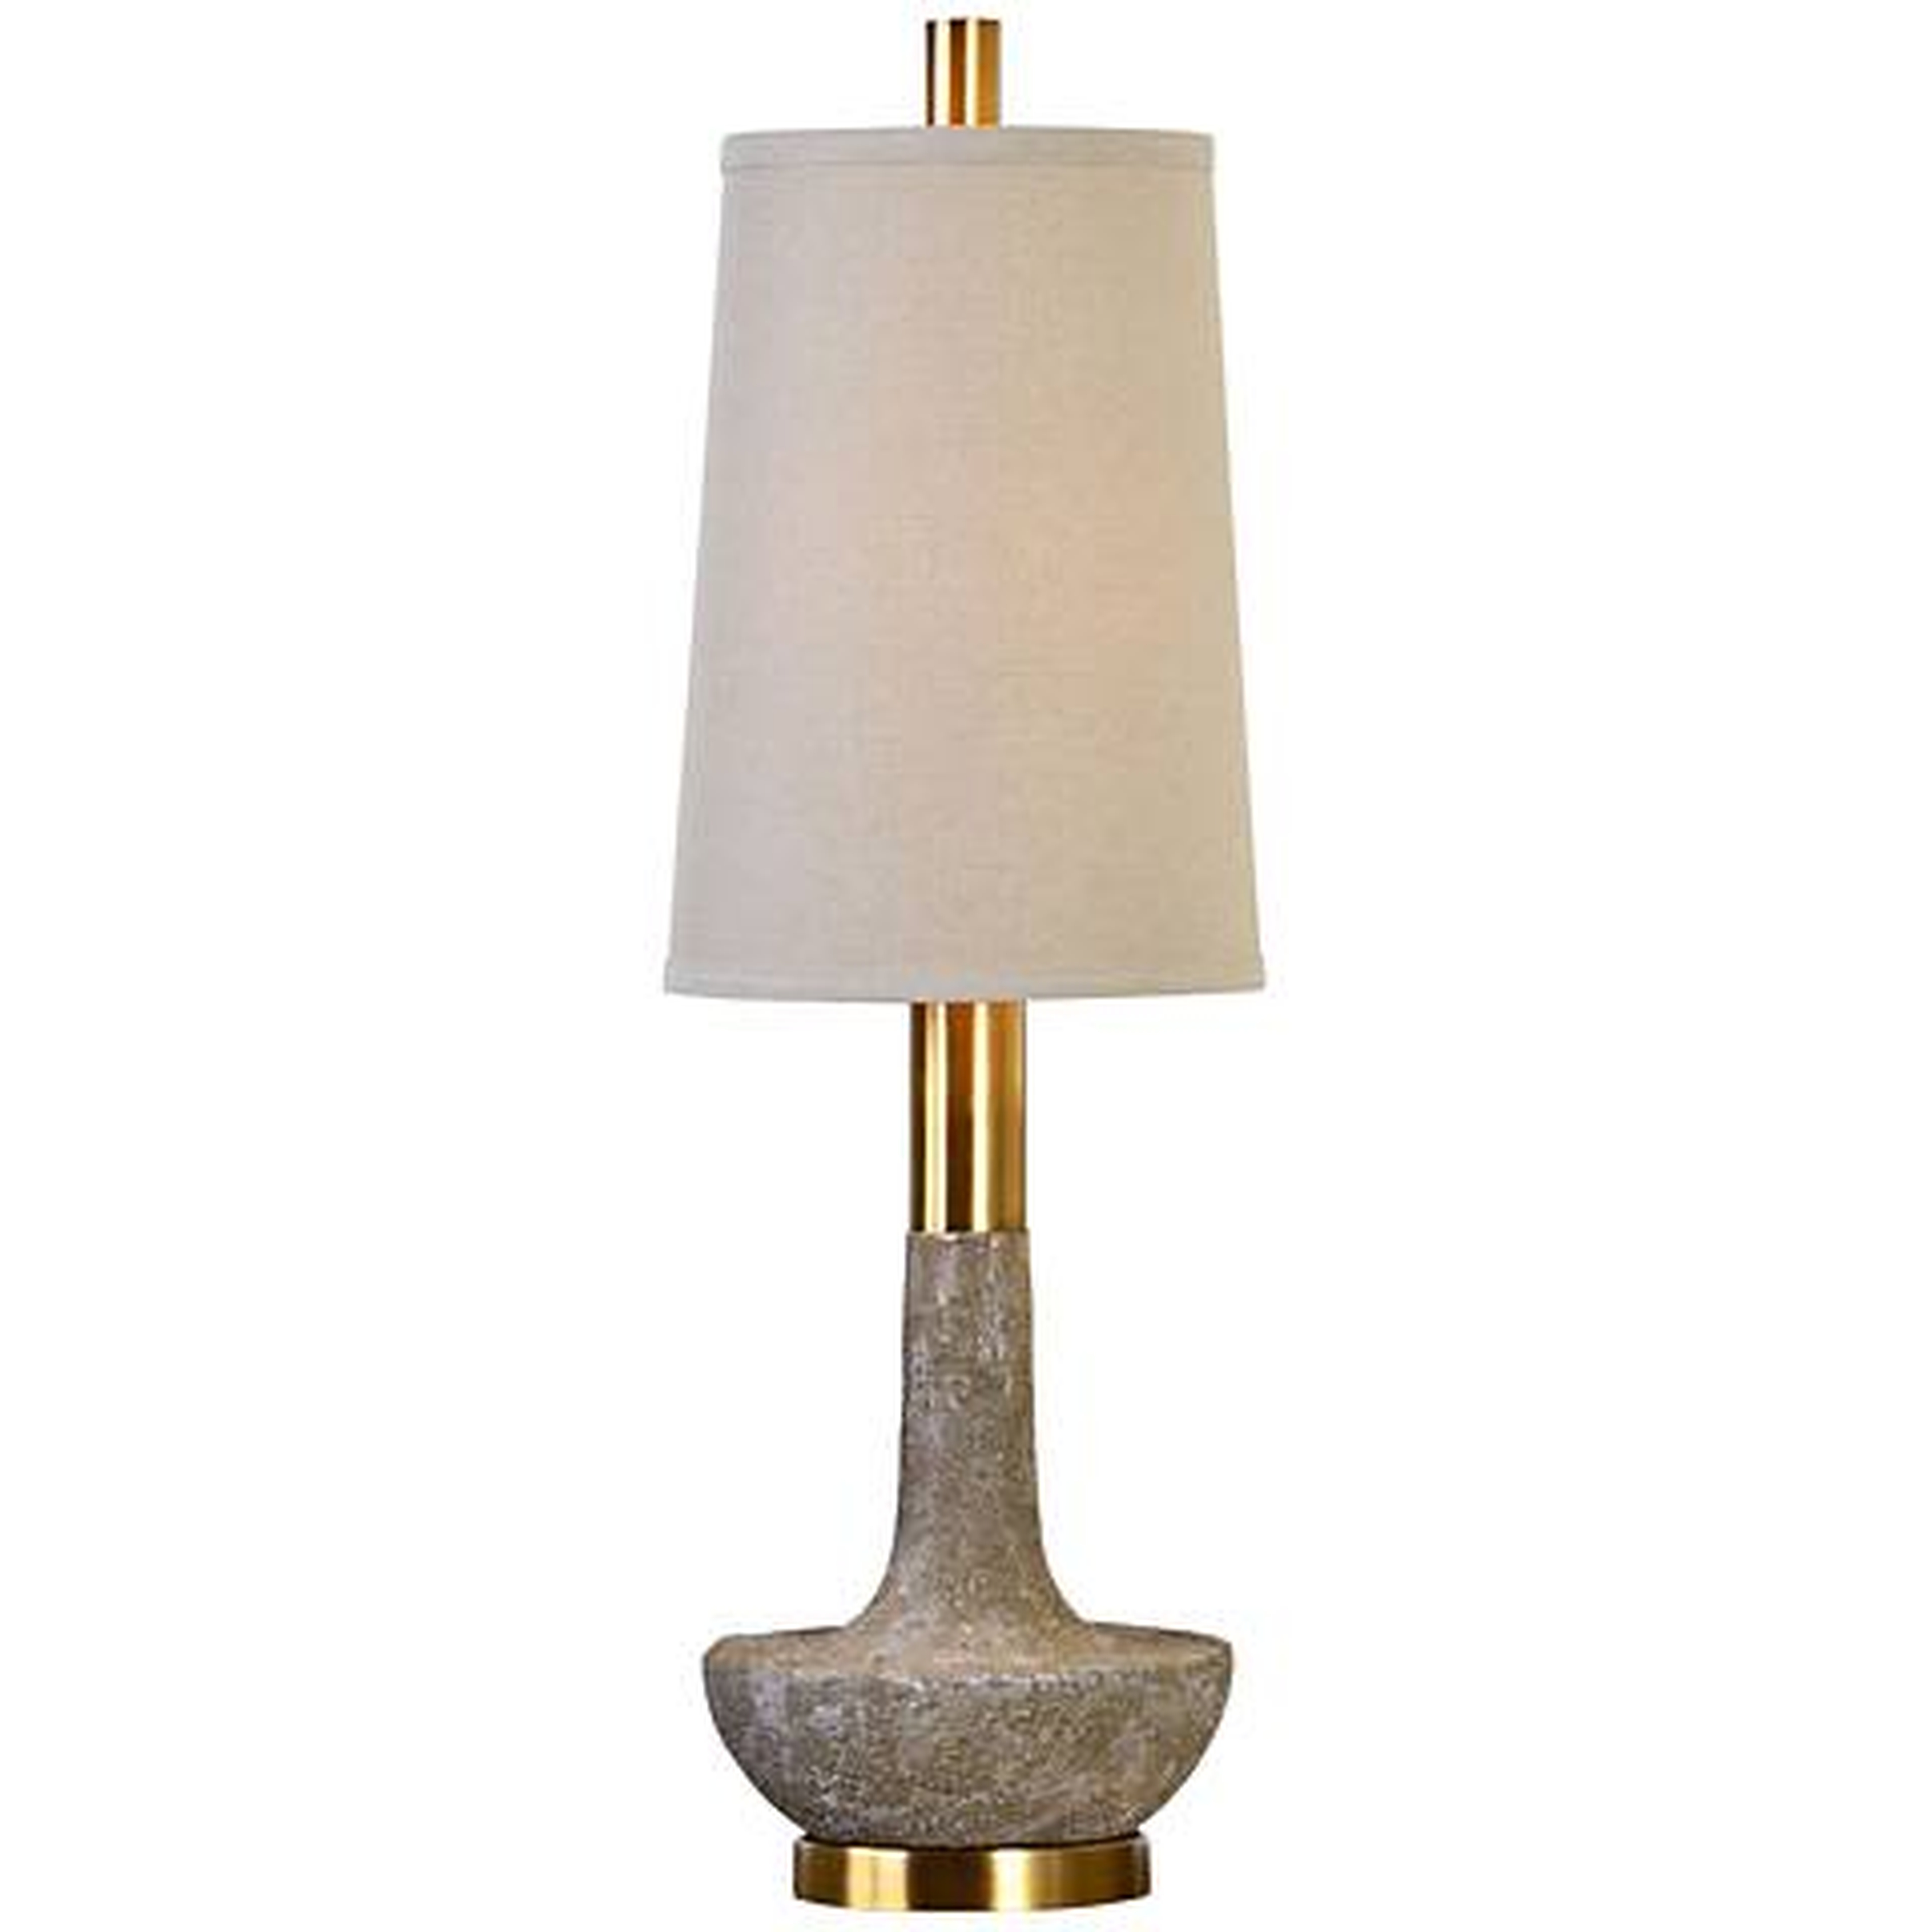 Uttermost Volongo Textured Stone Ivory Table Lamp - Lamps Plus